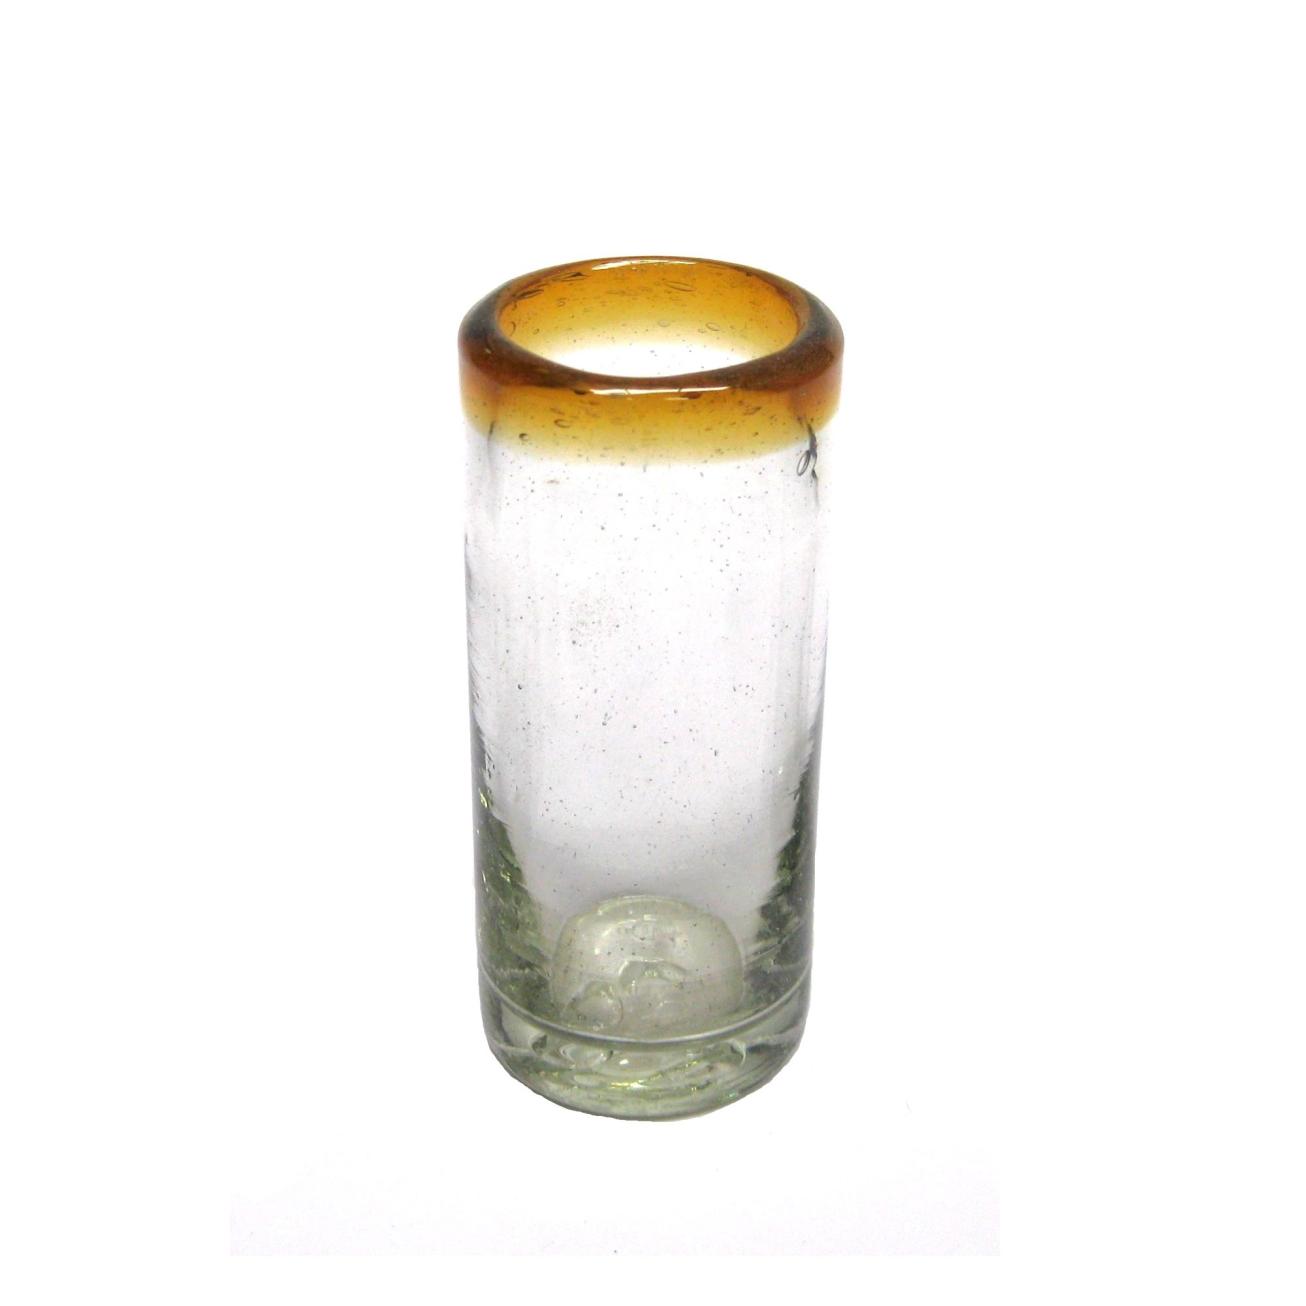 Amber Rim Glassware / Amber Rim 2 oz Tequila Shot Glasses (set of 6) / These shot glasses bordered in amber color are perfect for sipping your favourite tequila or any other liquor.